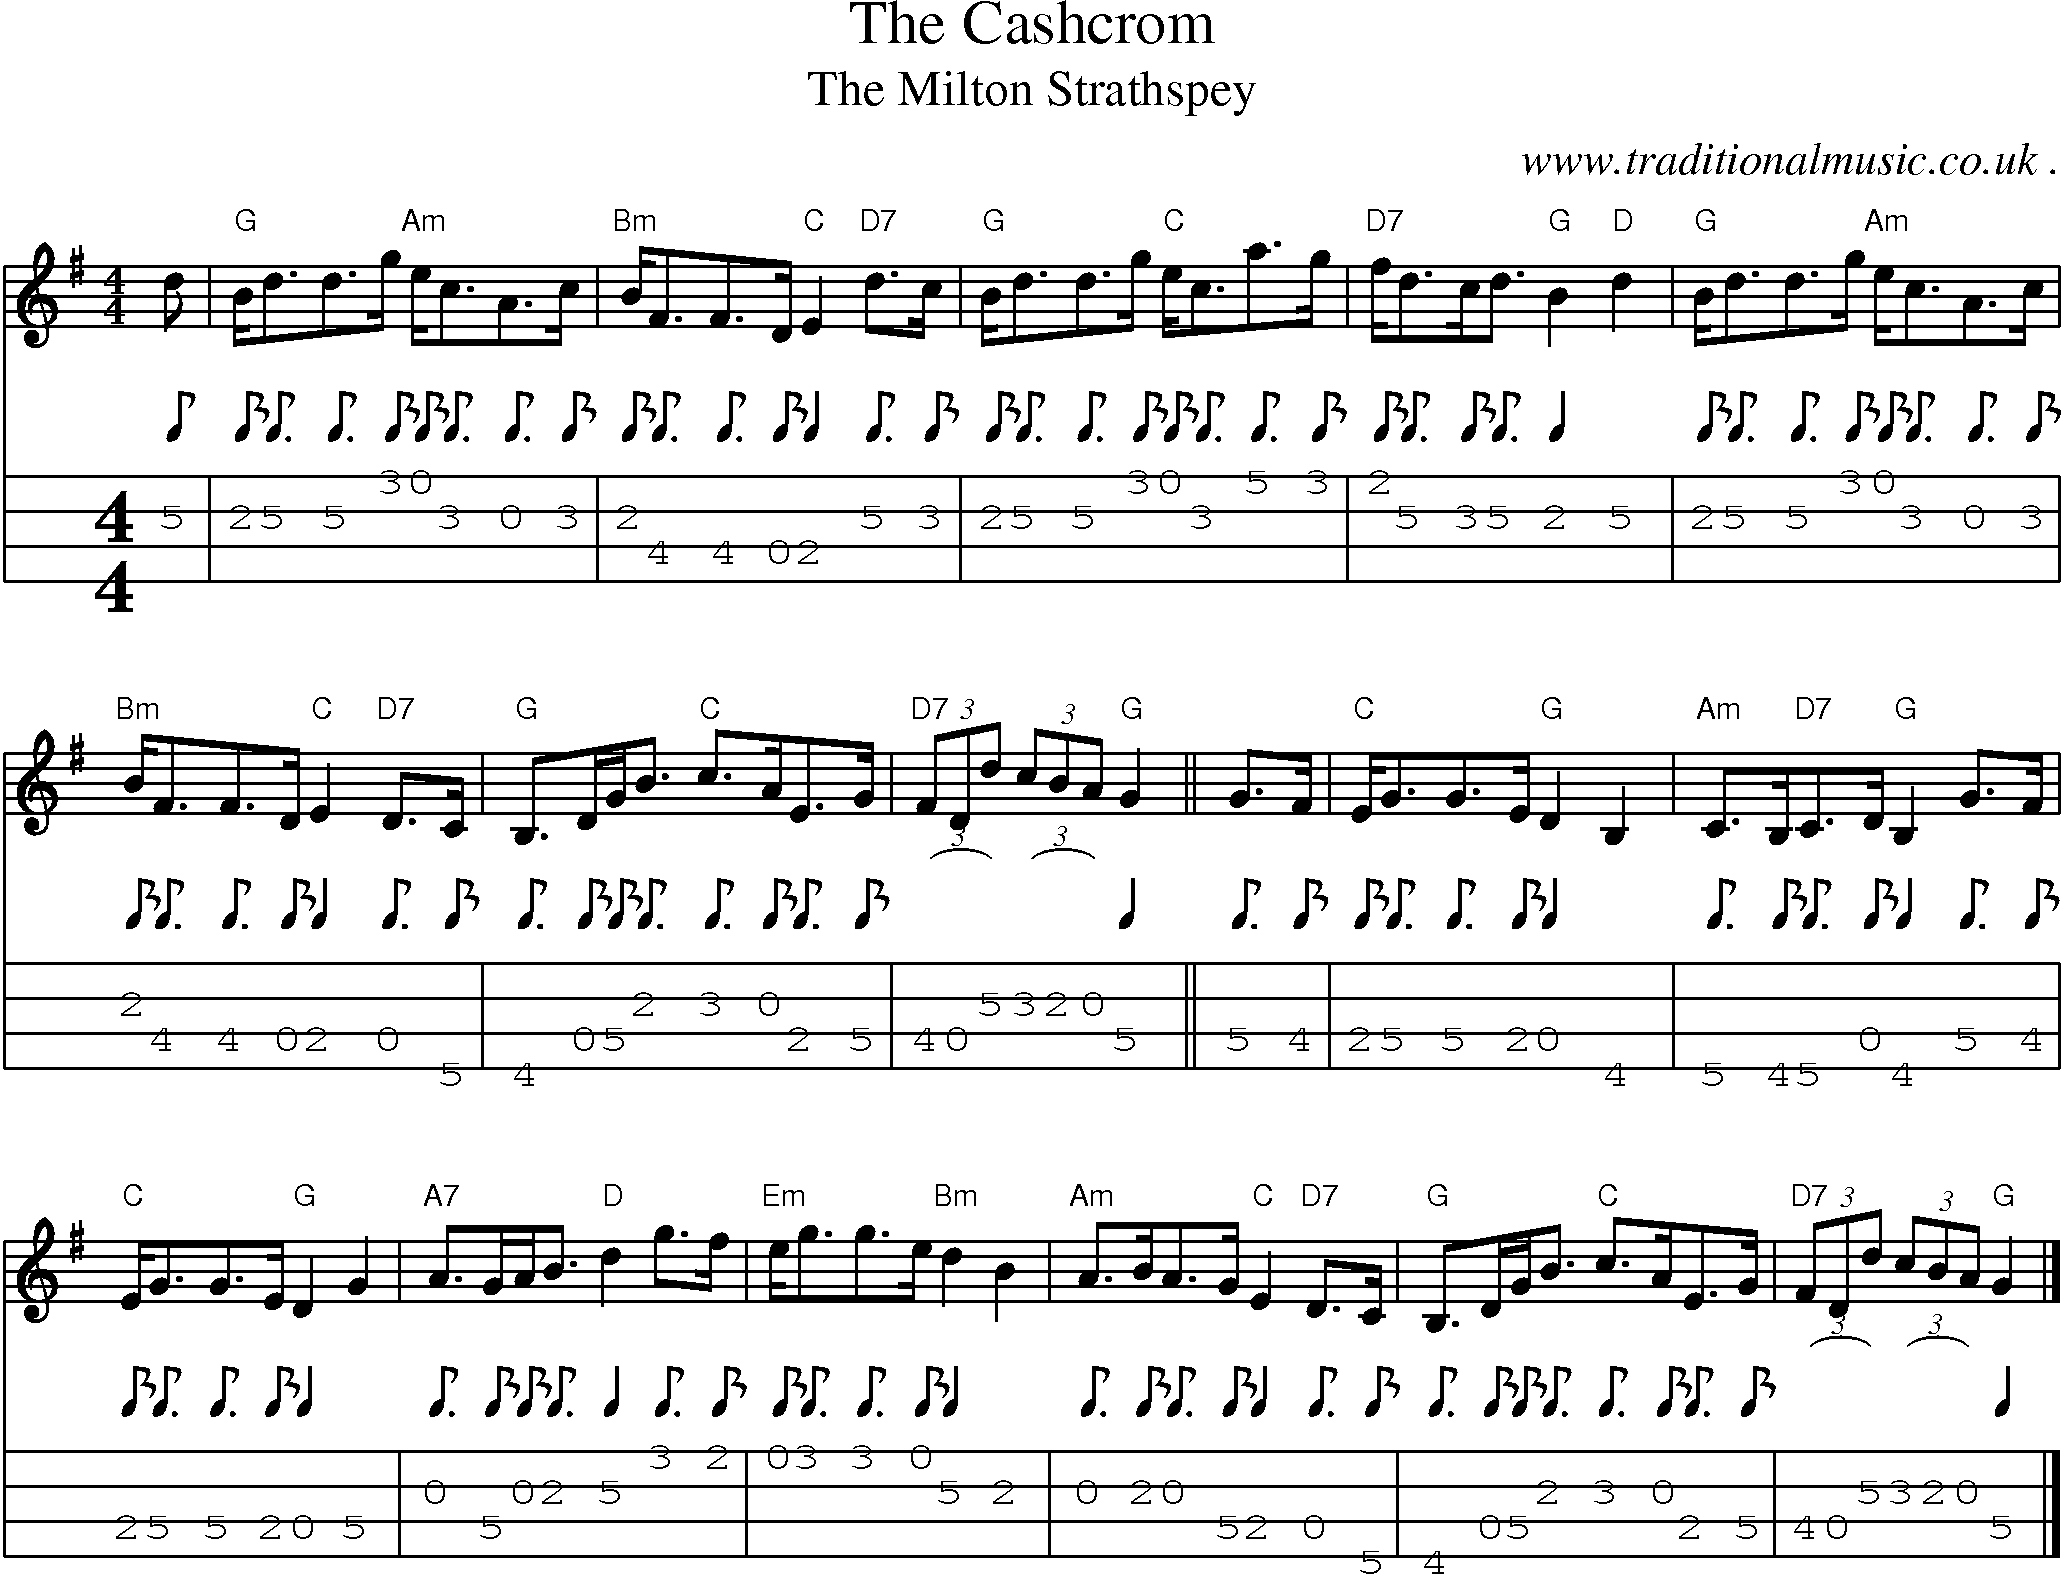 Sheet-music  score, Chords and Mandolin Tabs for The Cashcrom